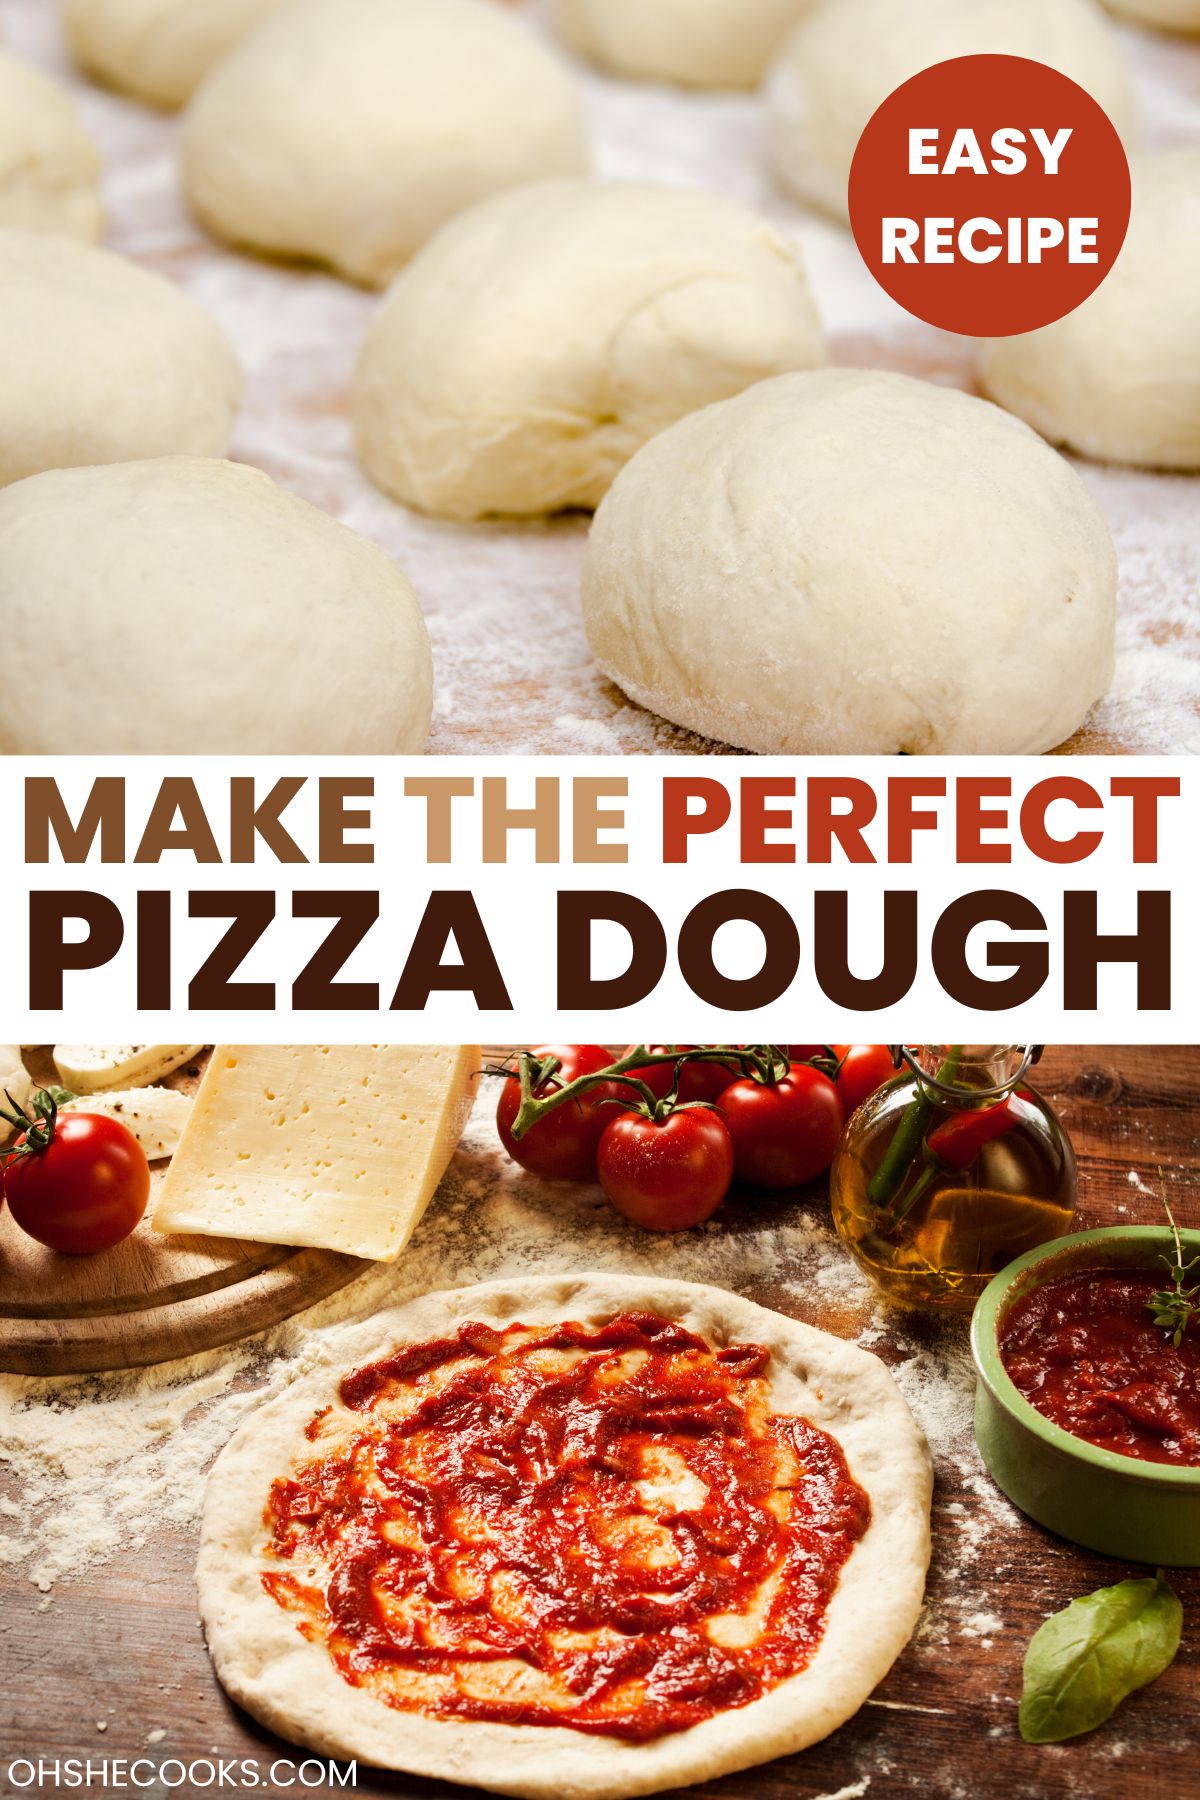 How to Make the Perfect Pizza Dough